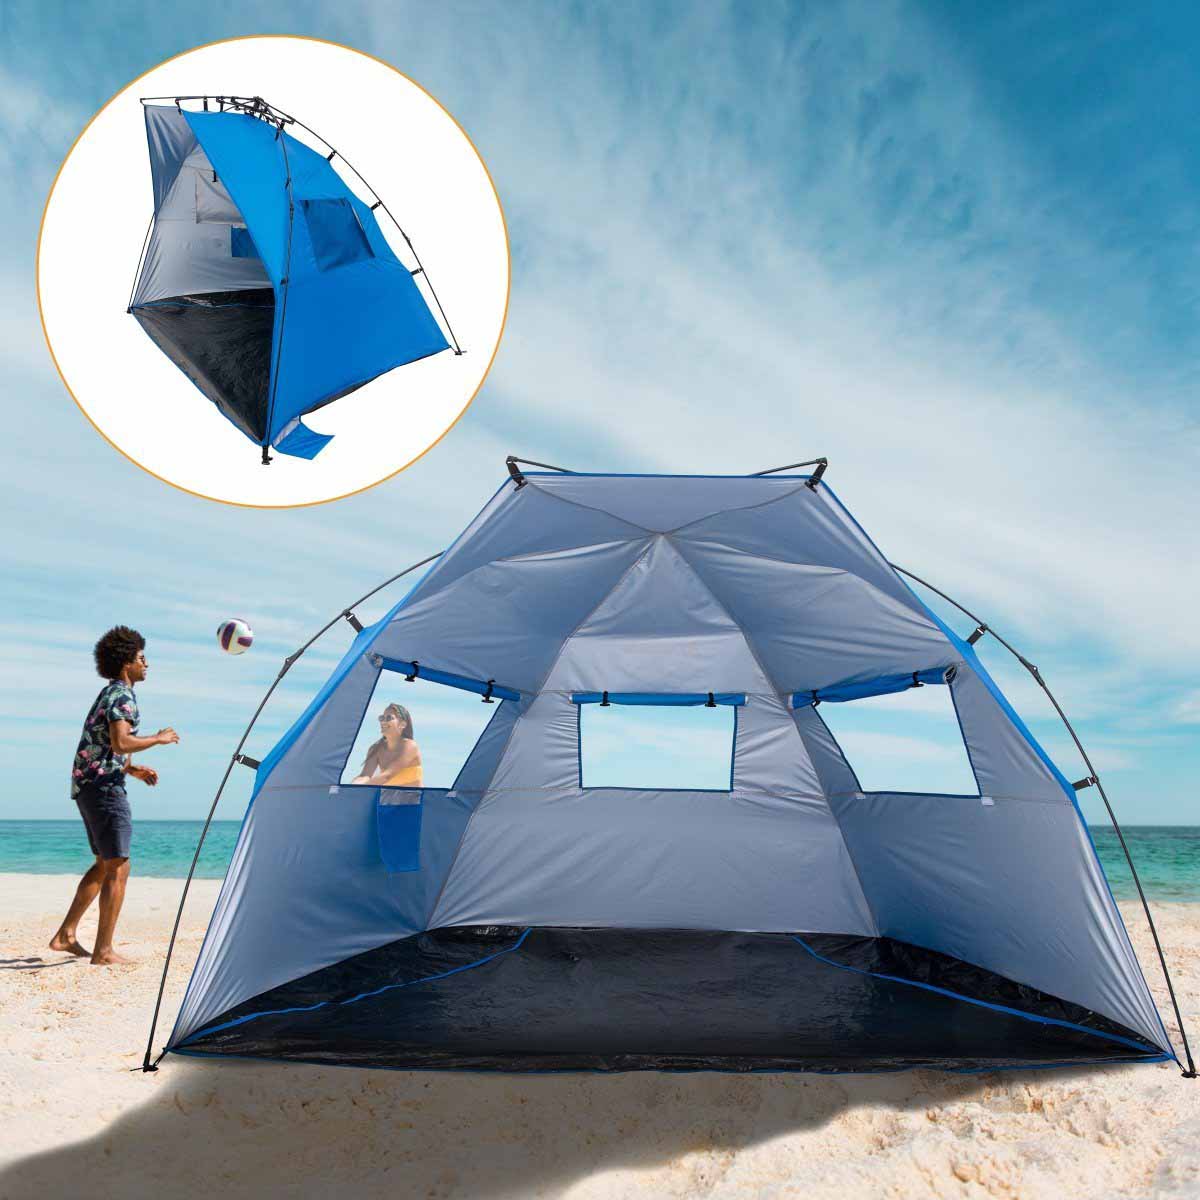 A couple is playing voleyball near the 4 Person Large Easy Up Beach Tent Sun Shade Shelter UPF 50+ with three windows open